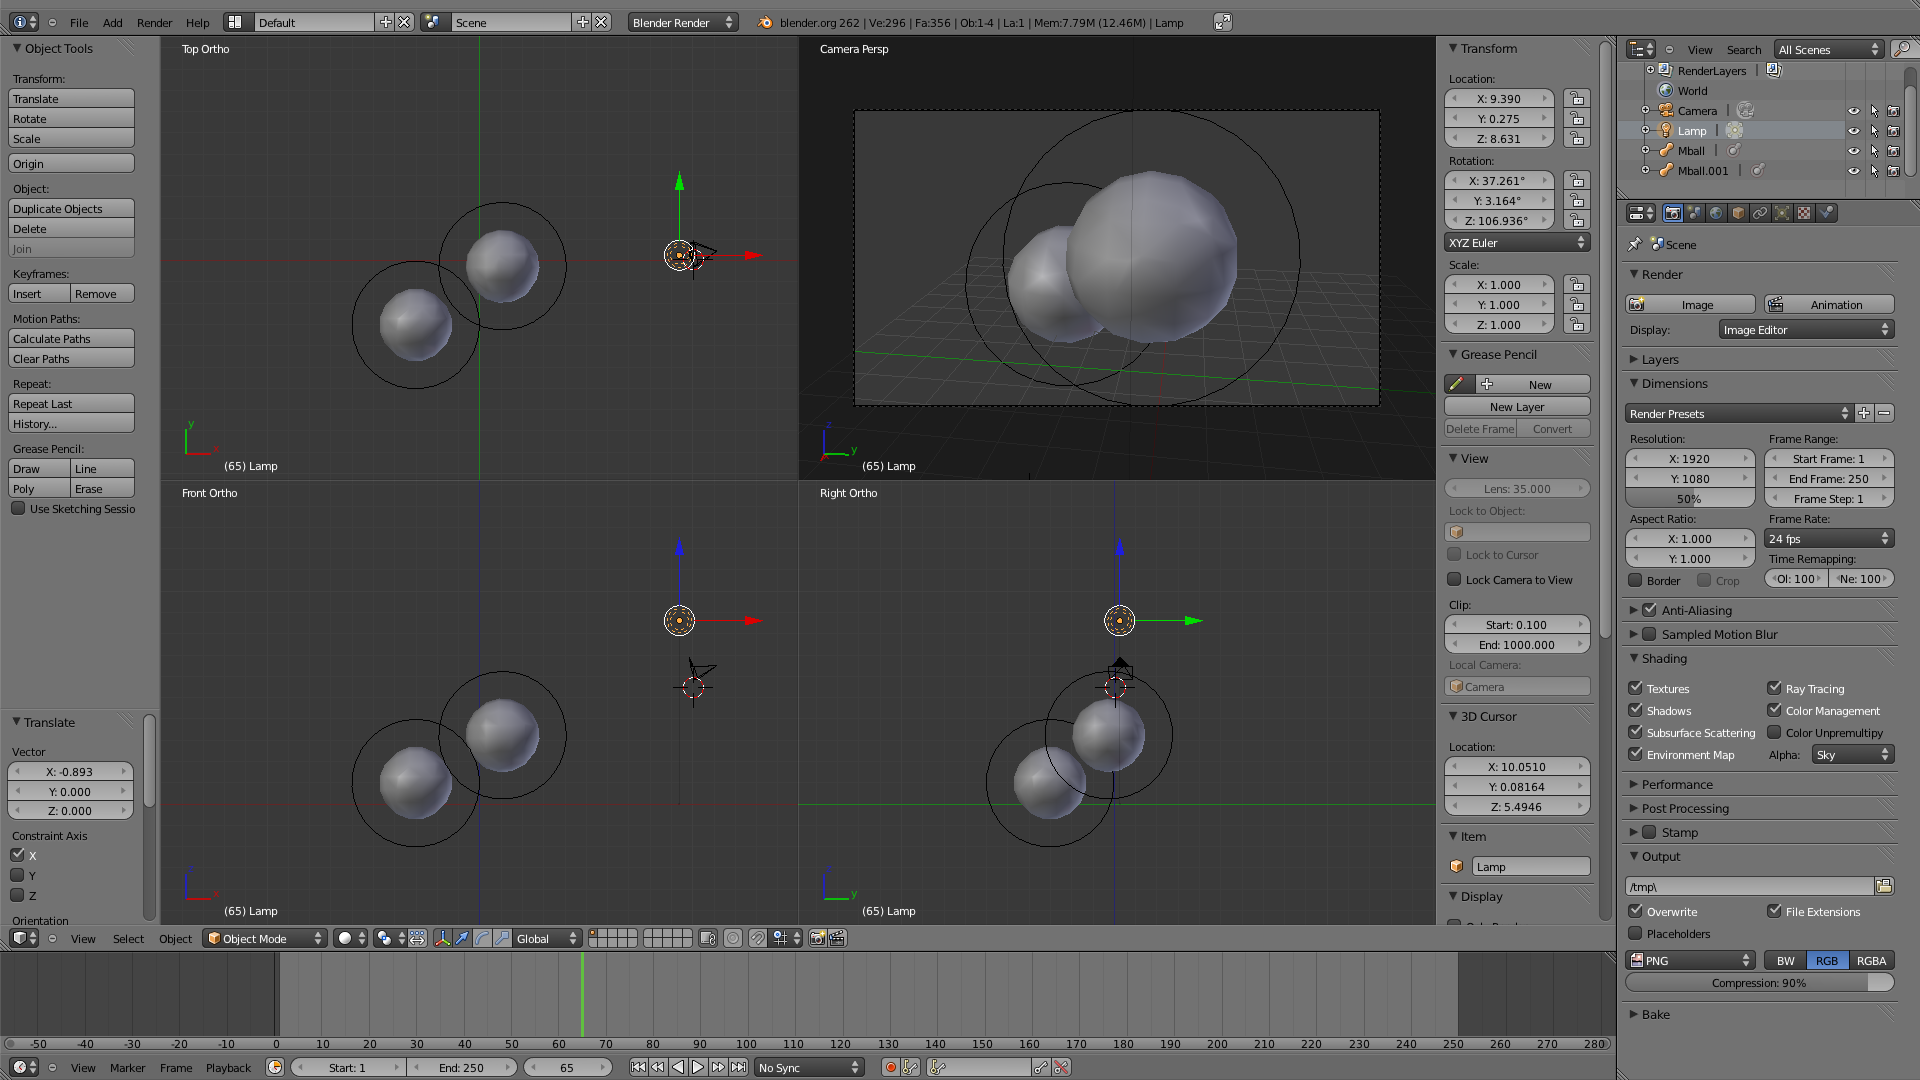 Reproducing the ray tracing scene in Blender